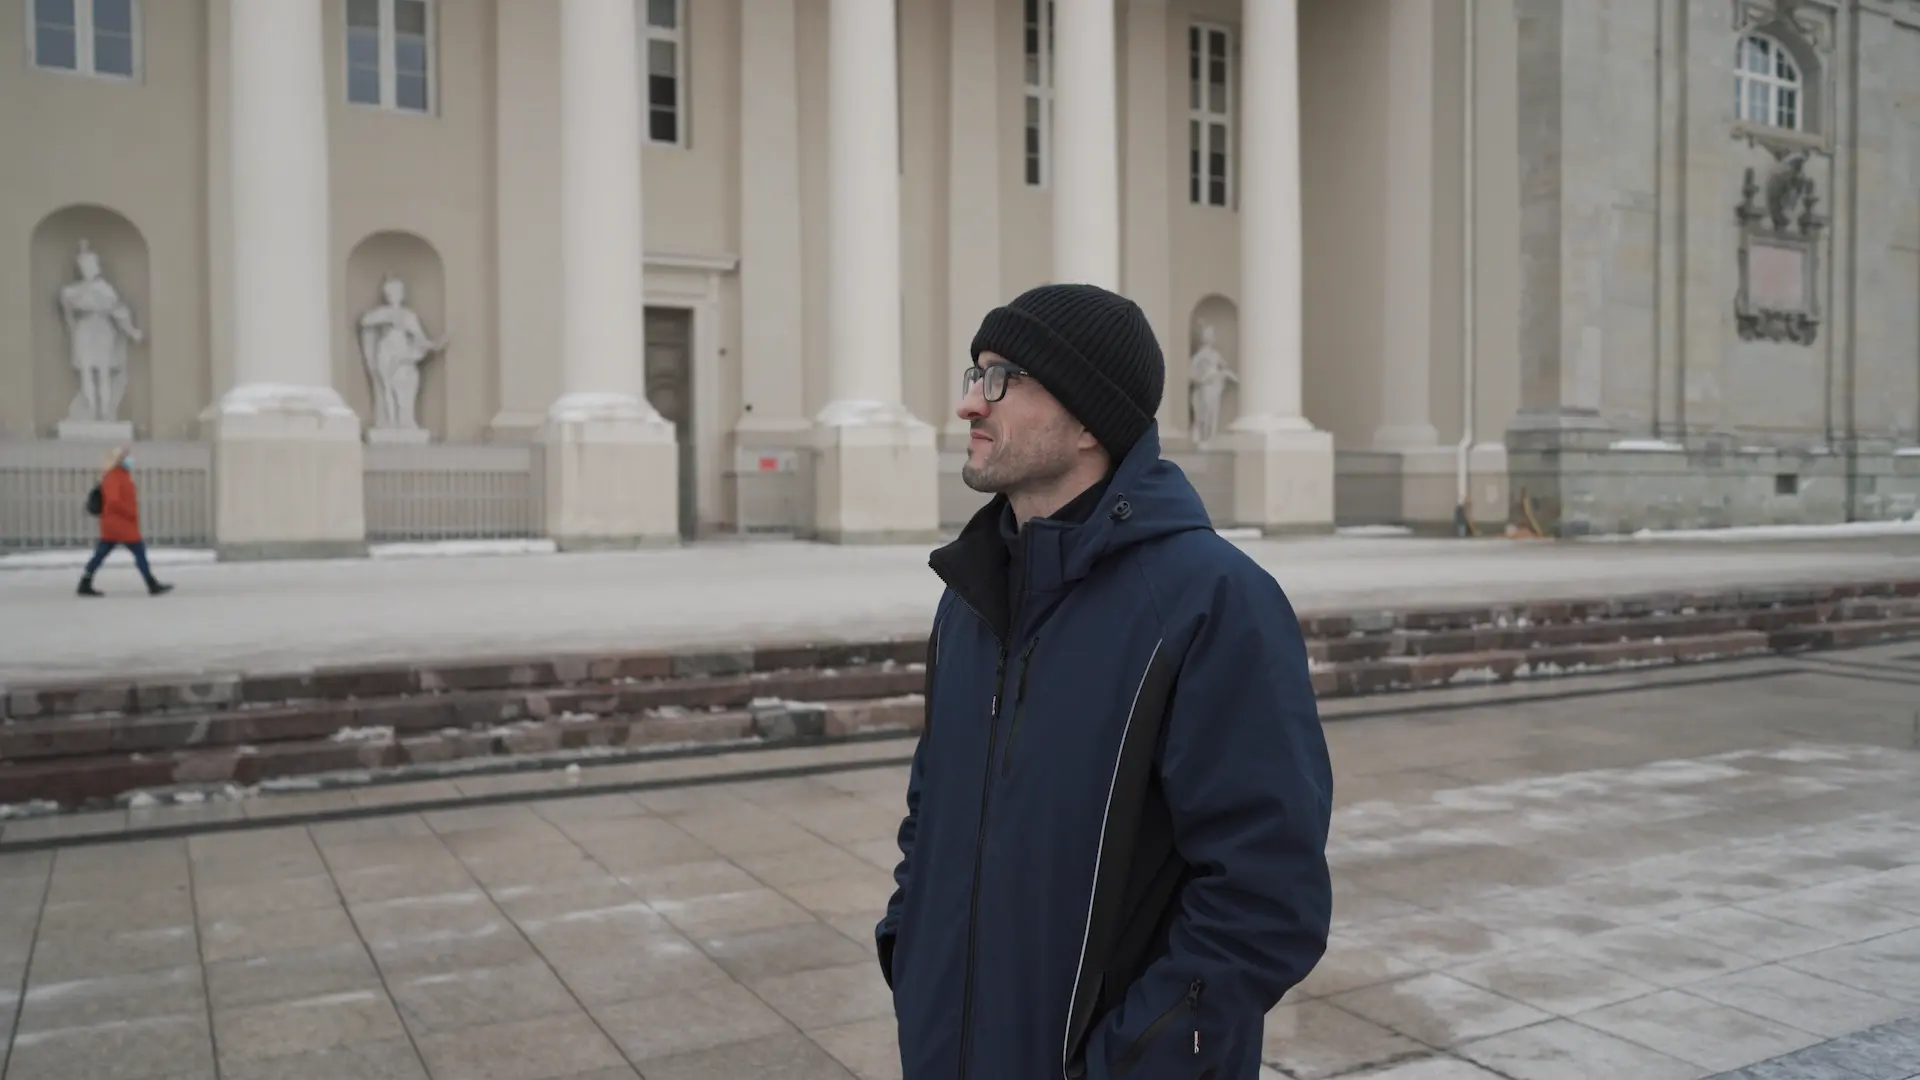 Sergei stands in front of palace